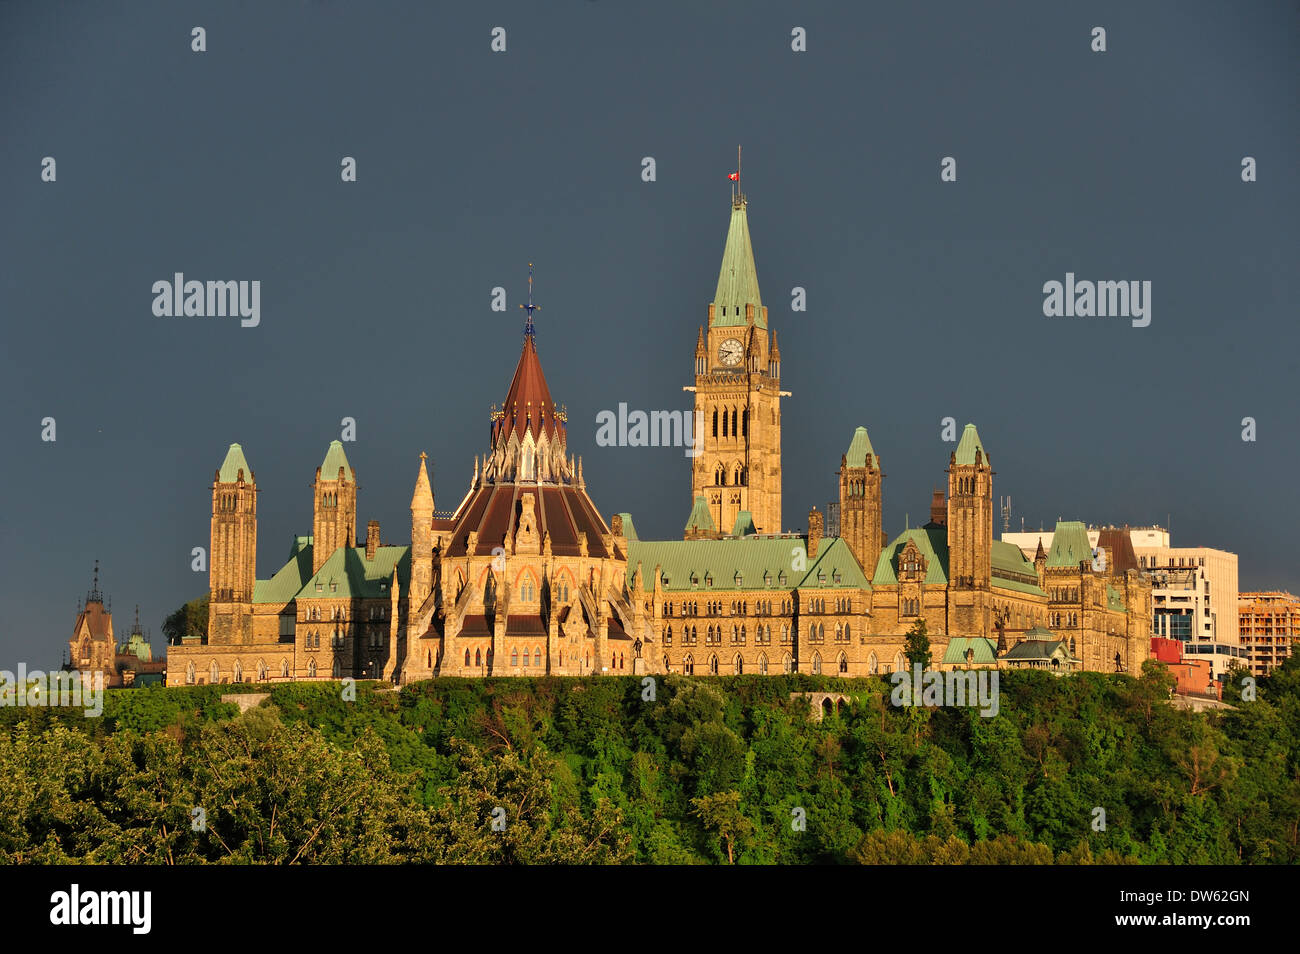 The Canadian parliament buildings, against a stormy sky. Space for text in the sky. Stock Photo